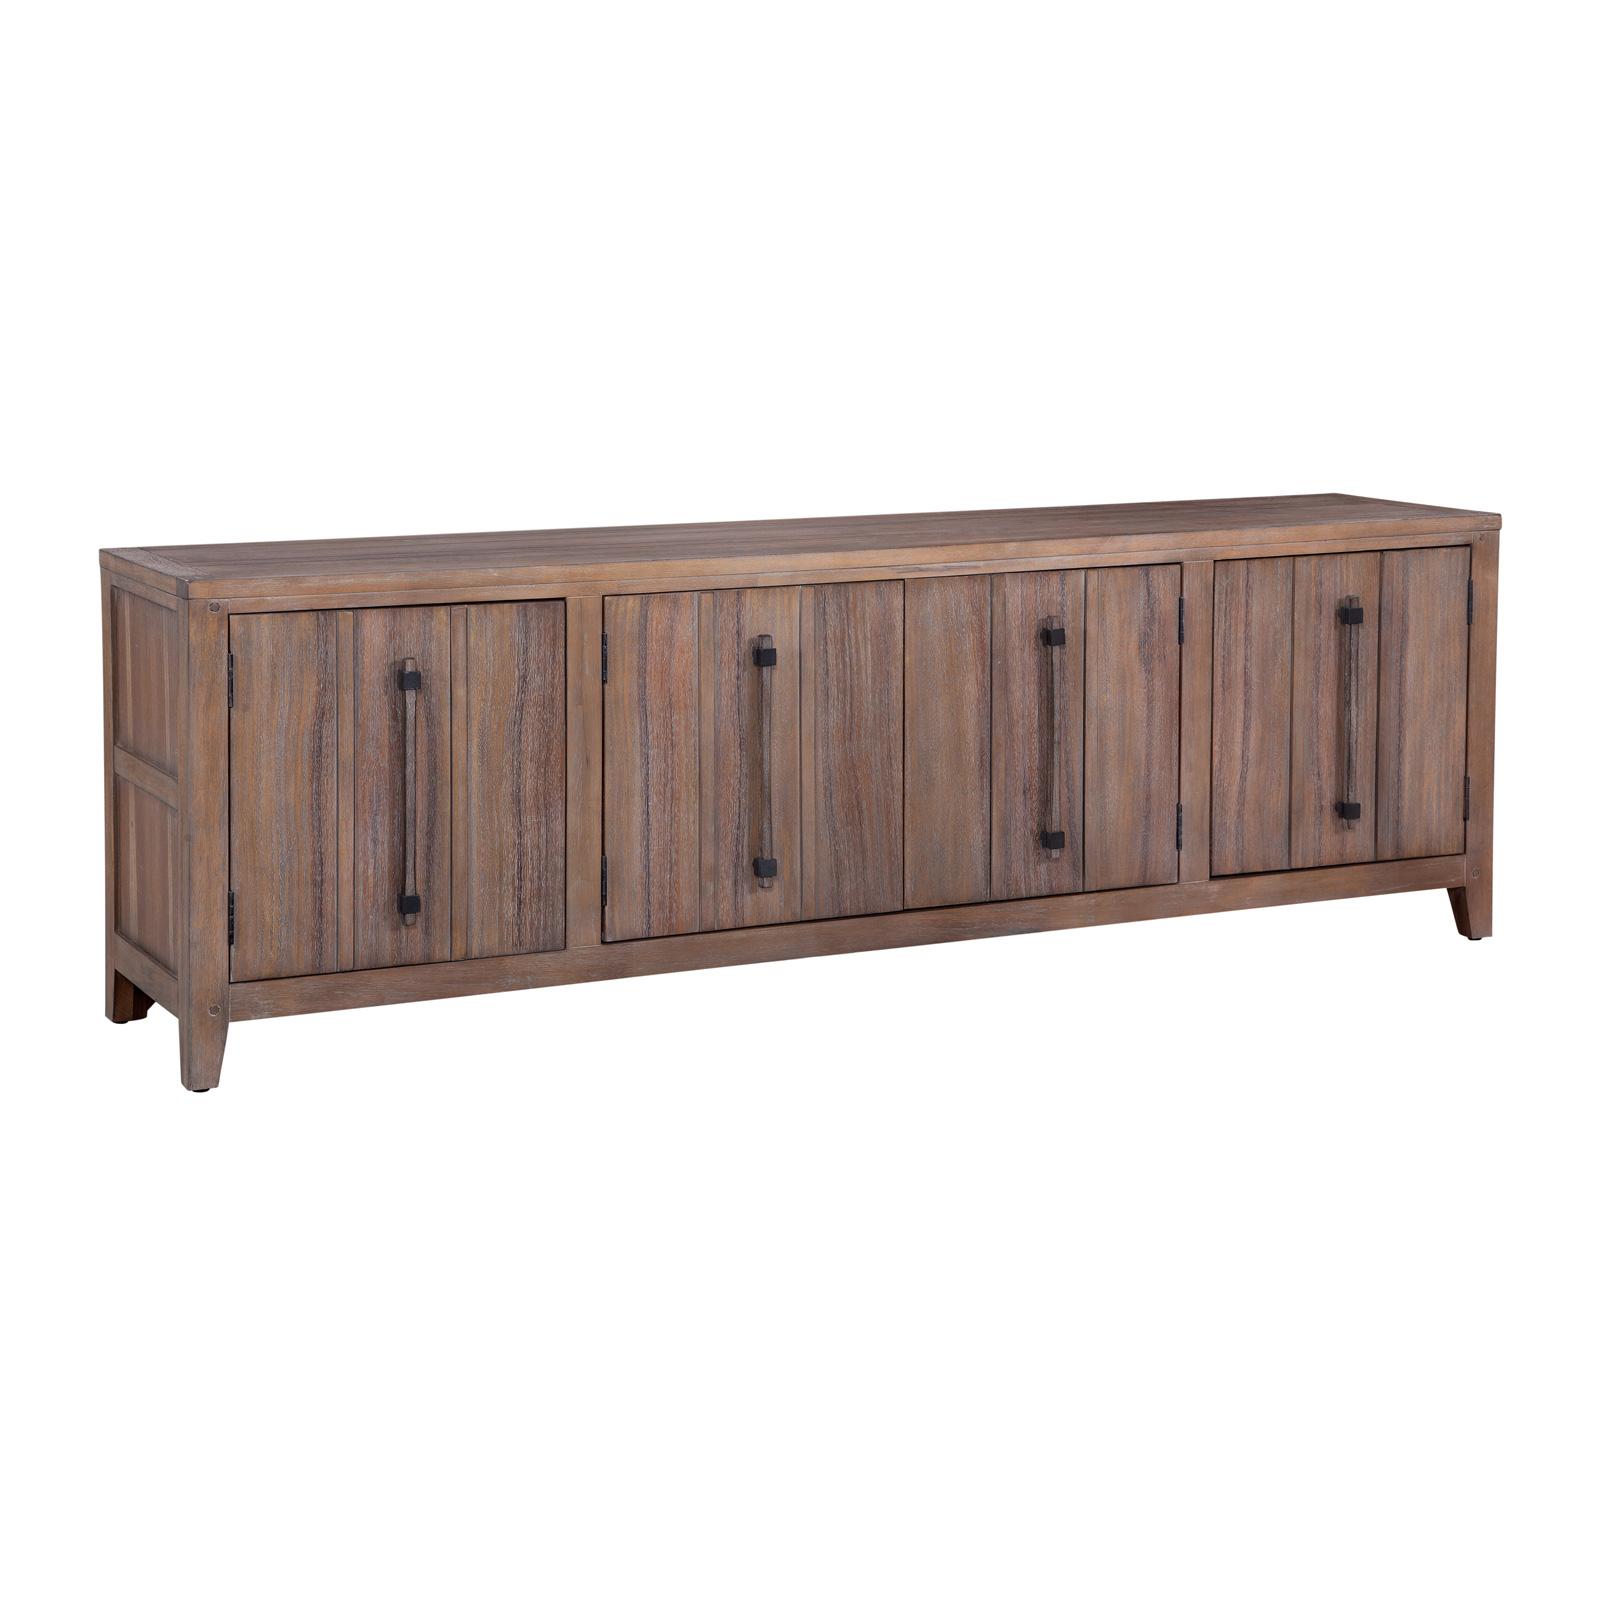 Cottage Tv Console AURORA 2800-240 2800-240 in Driftwood, Gray 